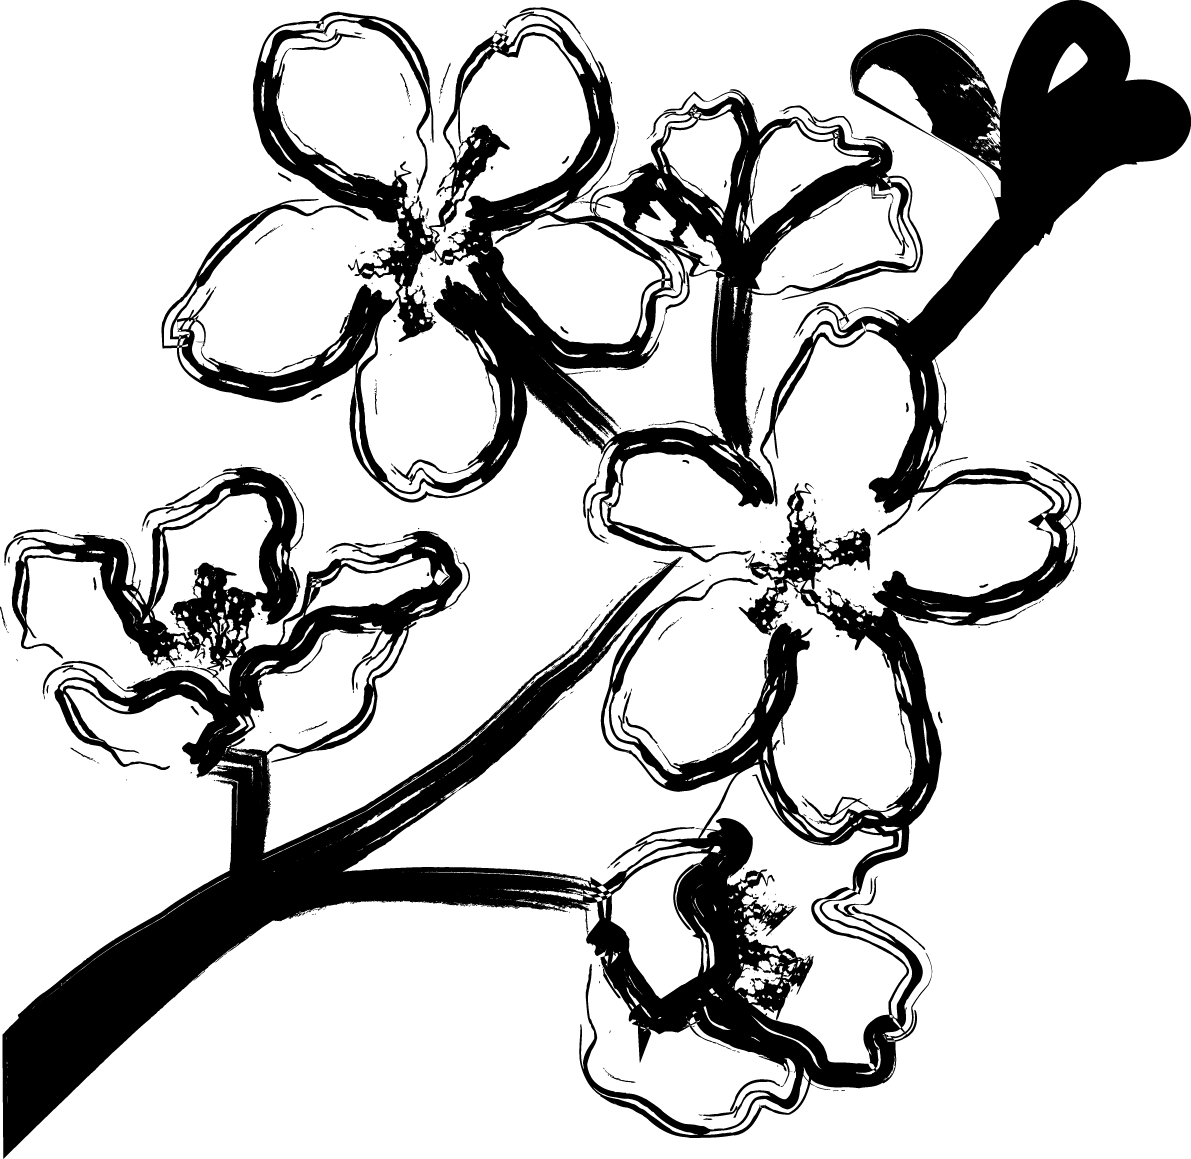 Black And White Cherry Blossom Japanese Style Illustration Fashionable Brush Style Branches And Petals Illustration Material Lots Of Free Illustration Materials Images